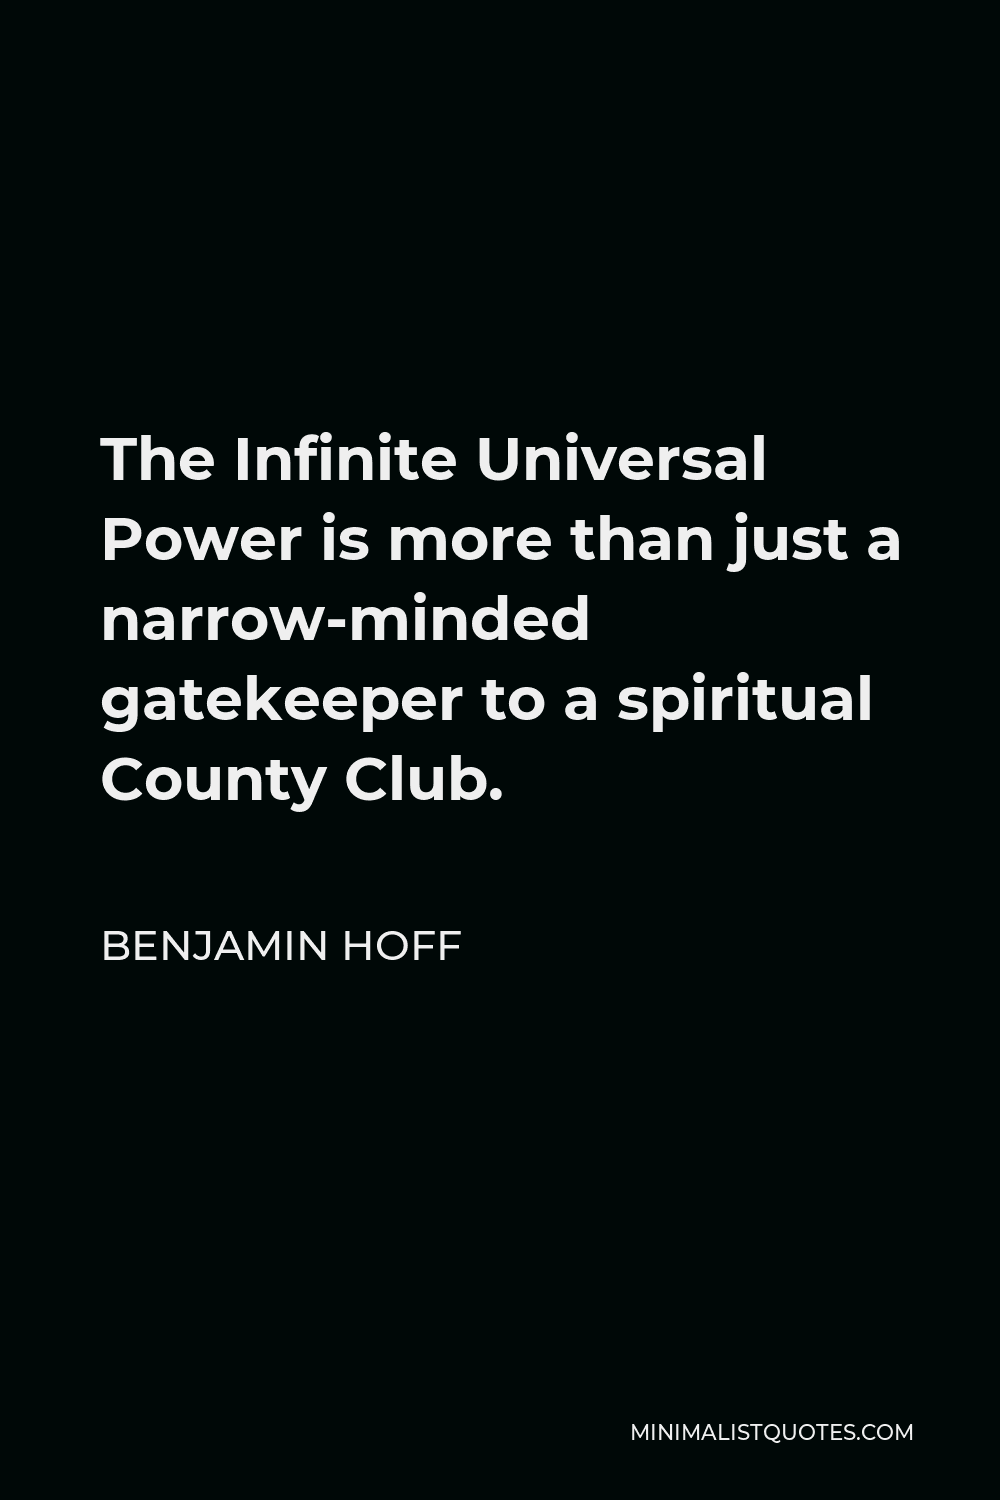 Benjamin Hoff Quote - The Infinite Universal Power is more than just a narrow-minded gatekeeper to a spiritual County Club.